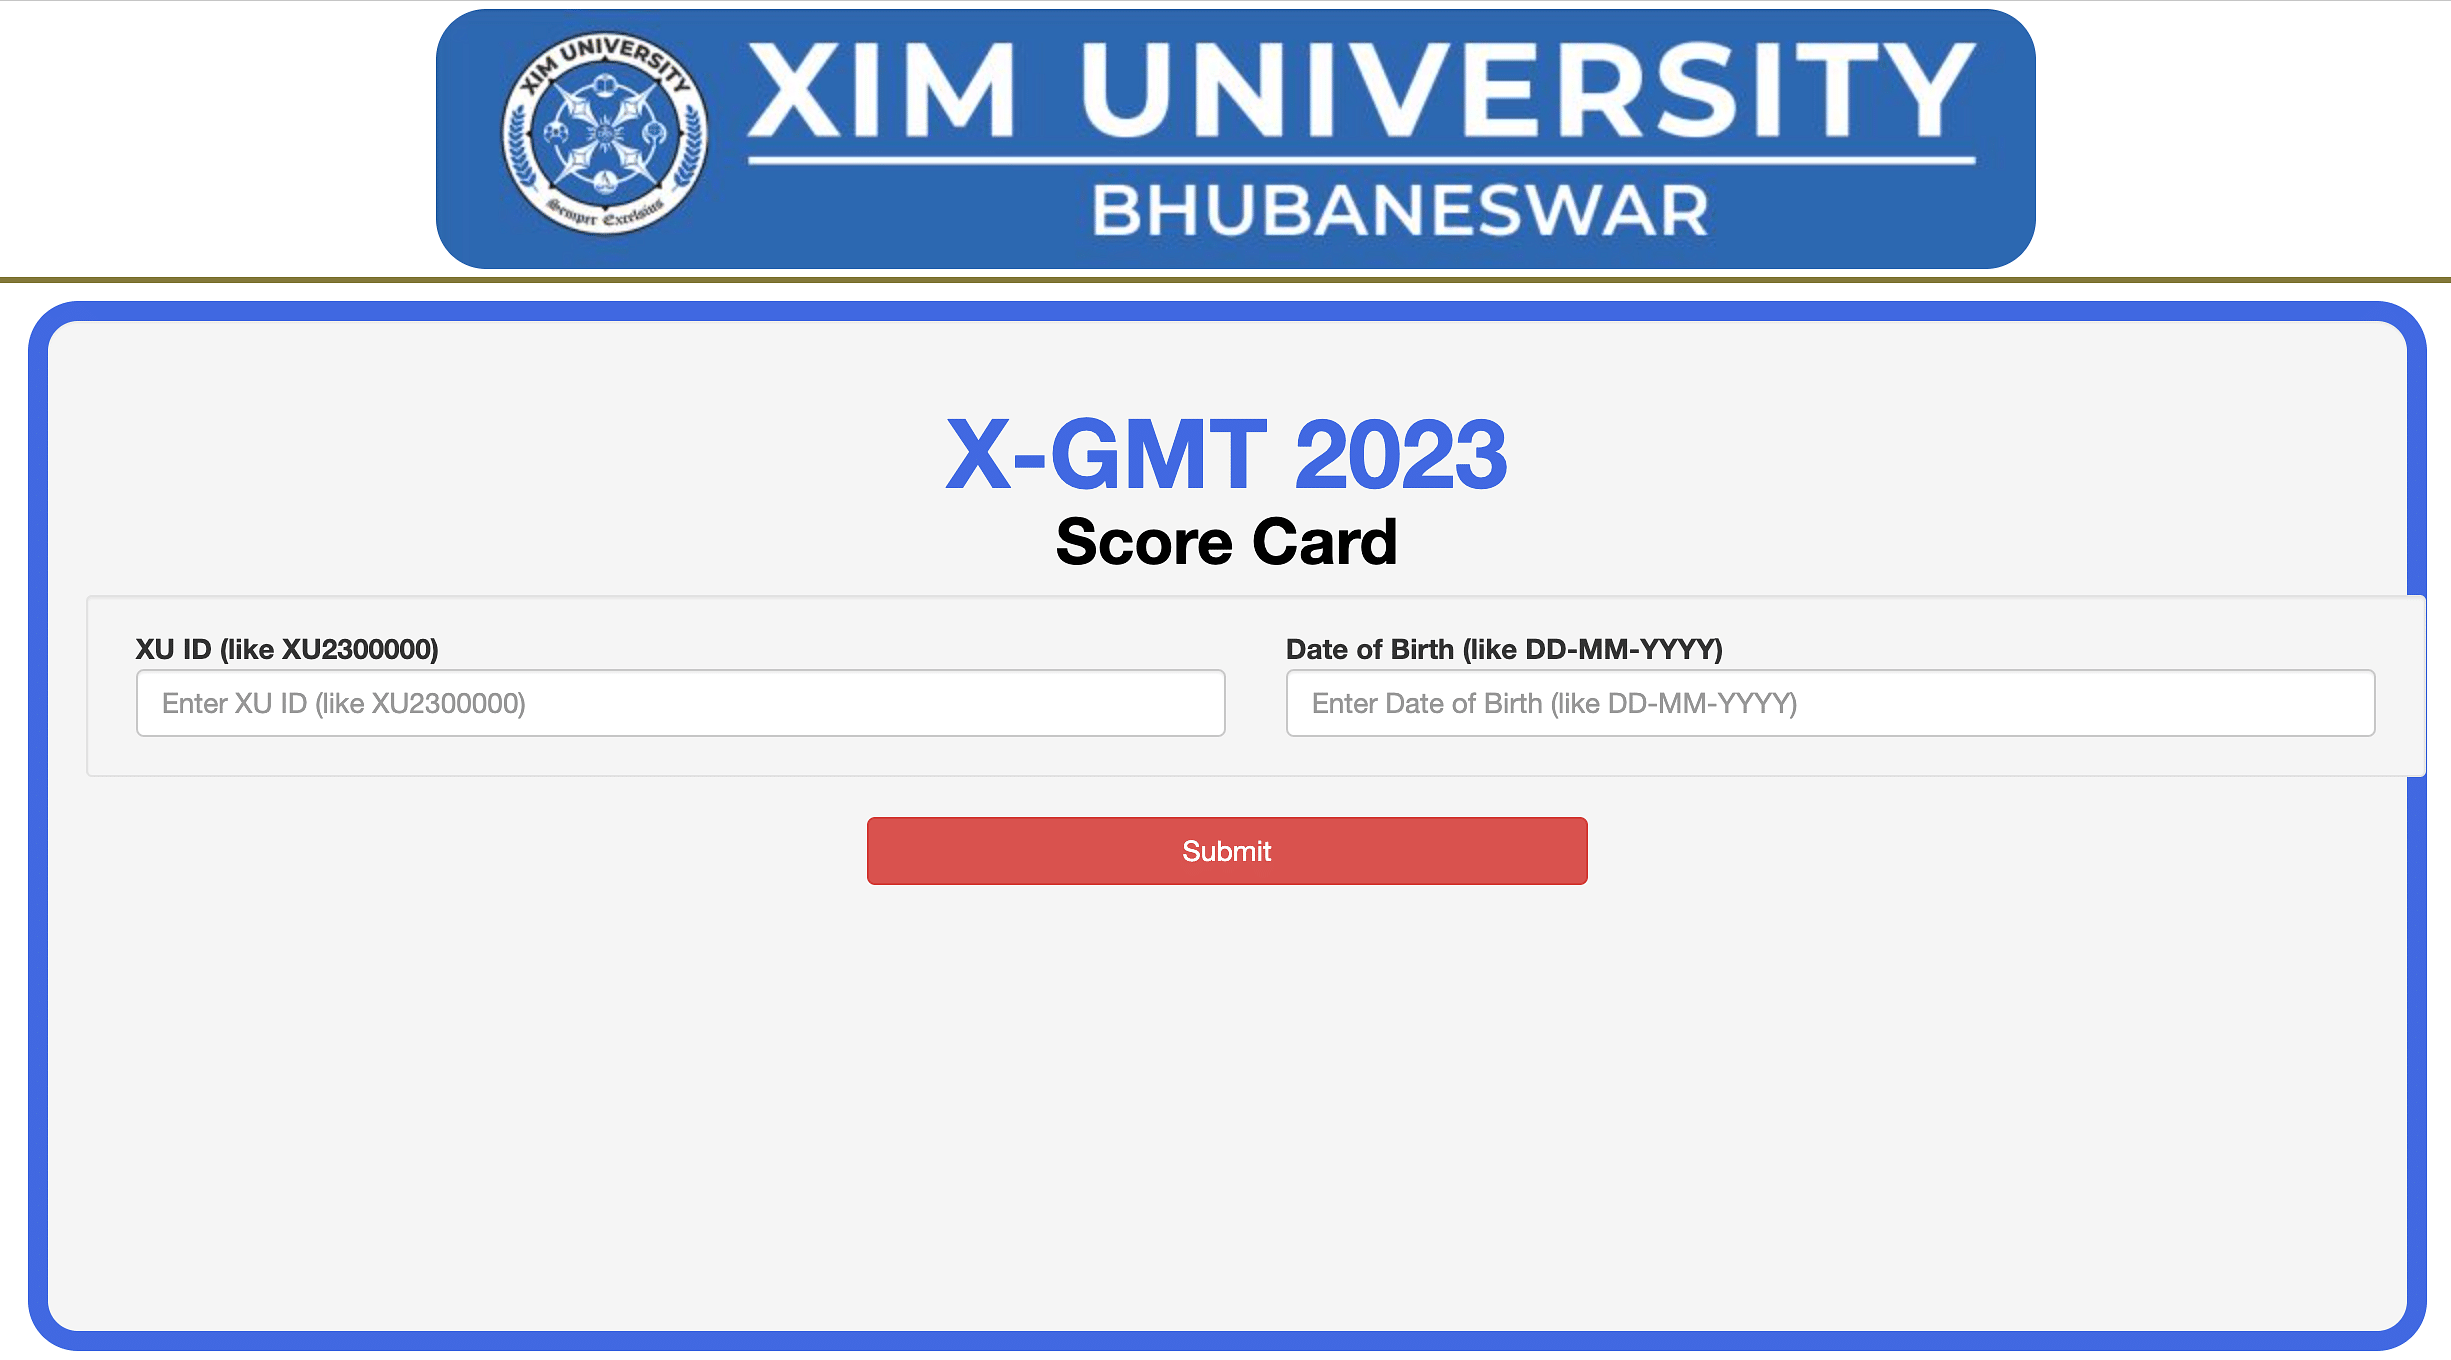 XGMT Result 2023